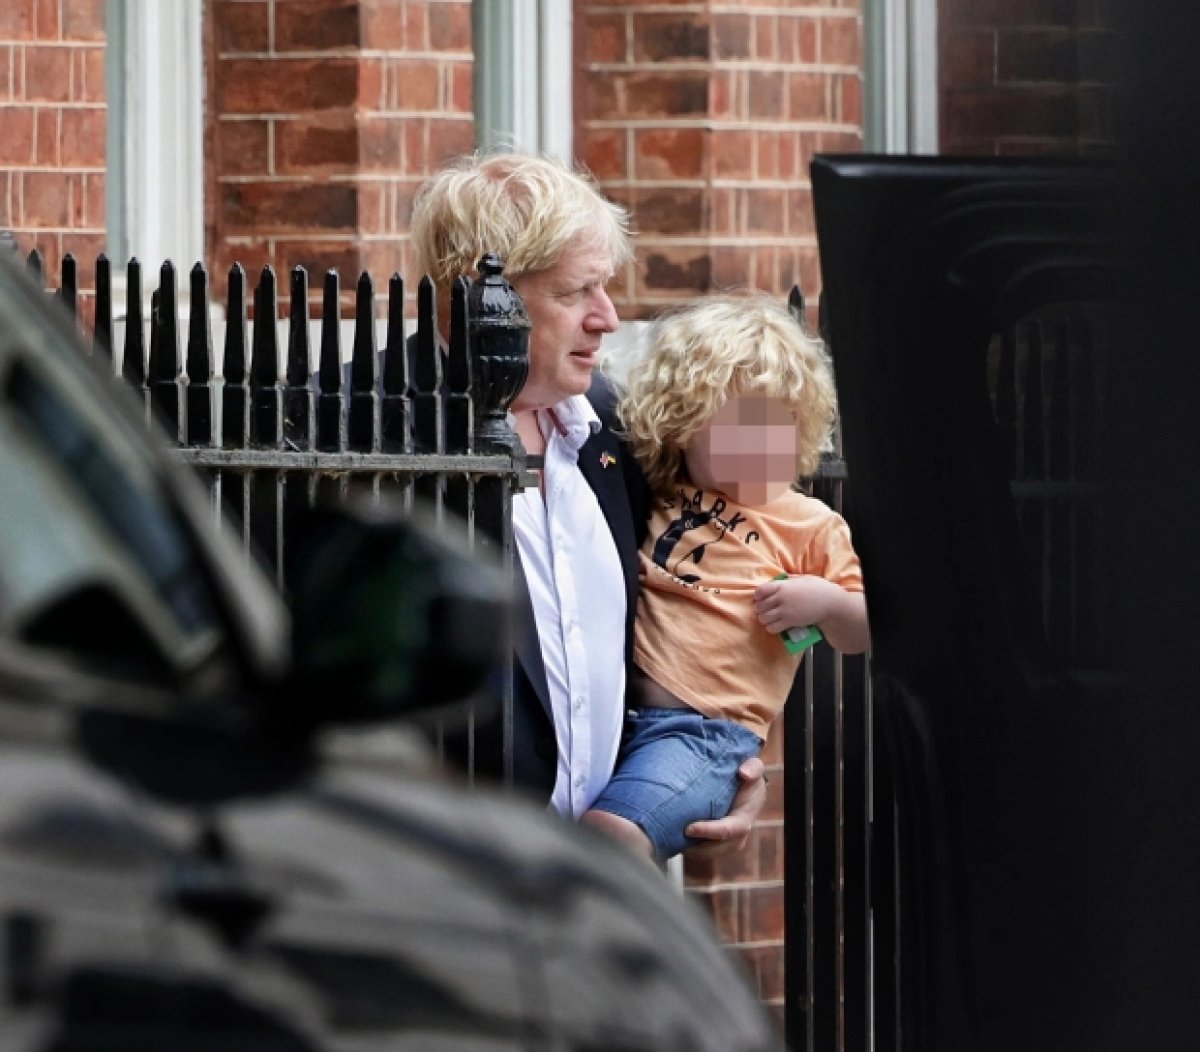 Boris Johnson and his son Wilfred caught on camera #1